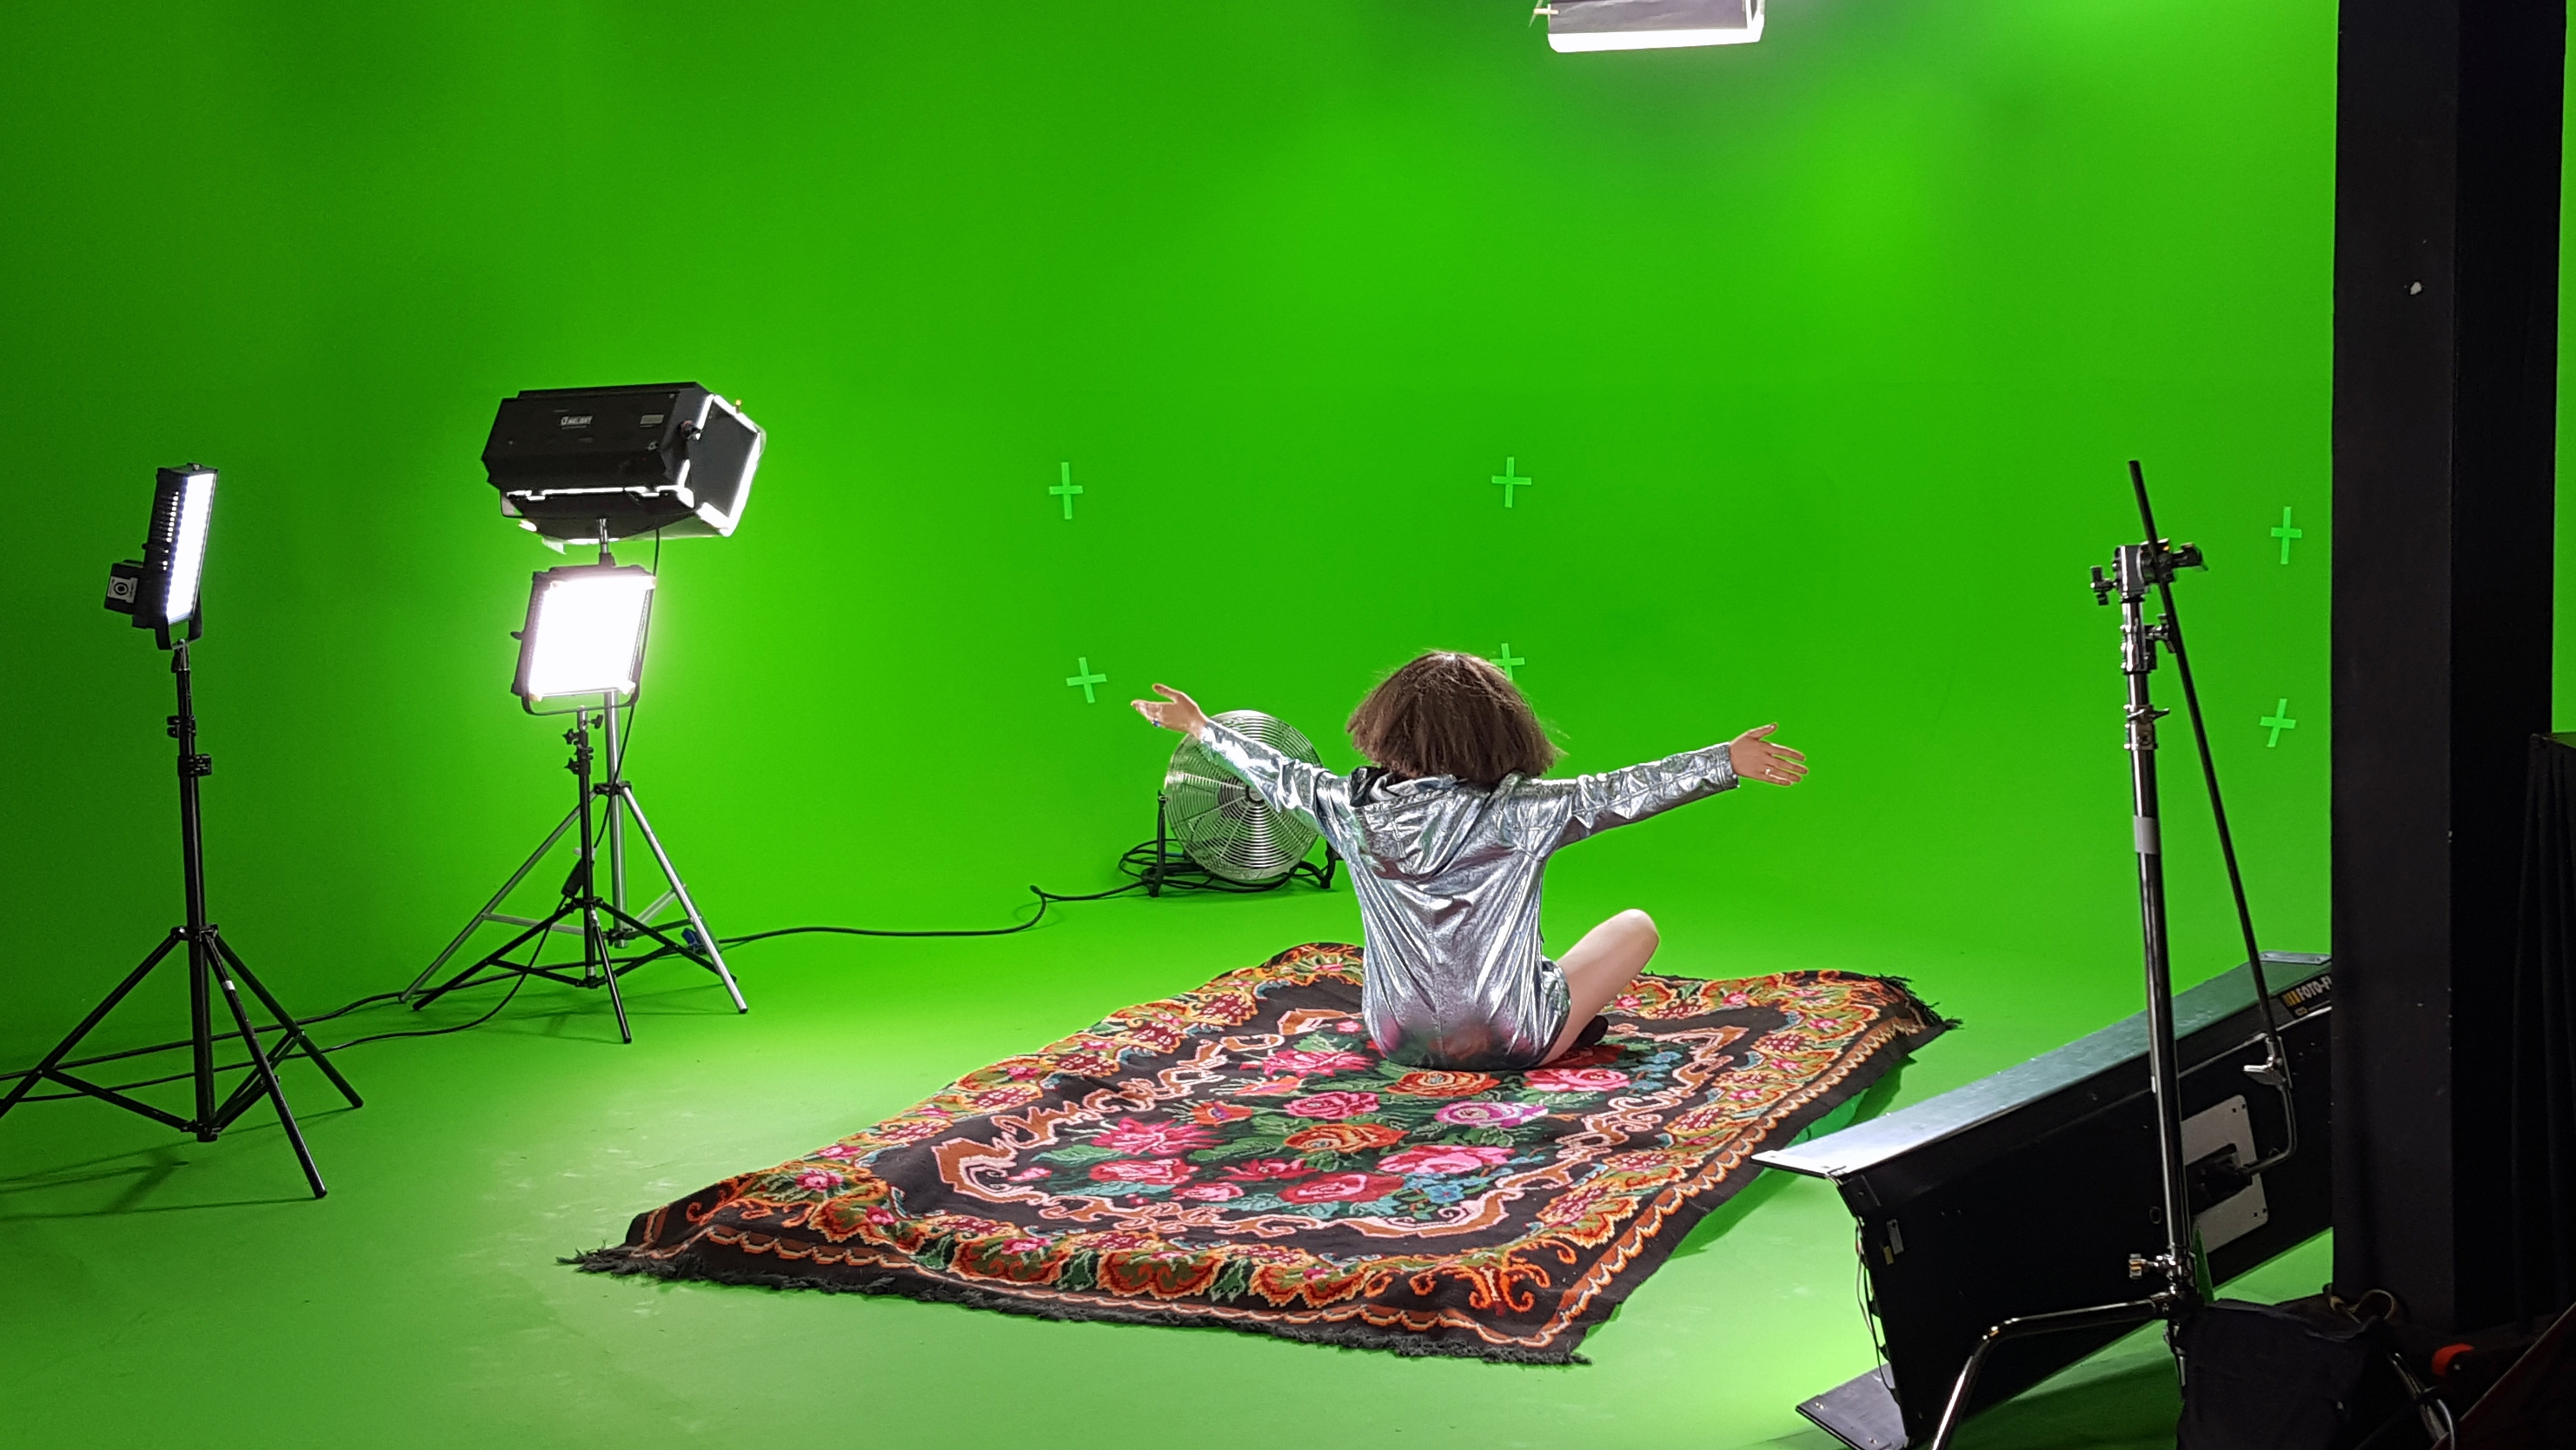 person sitting on a carpet on a greenscreen recording studio